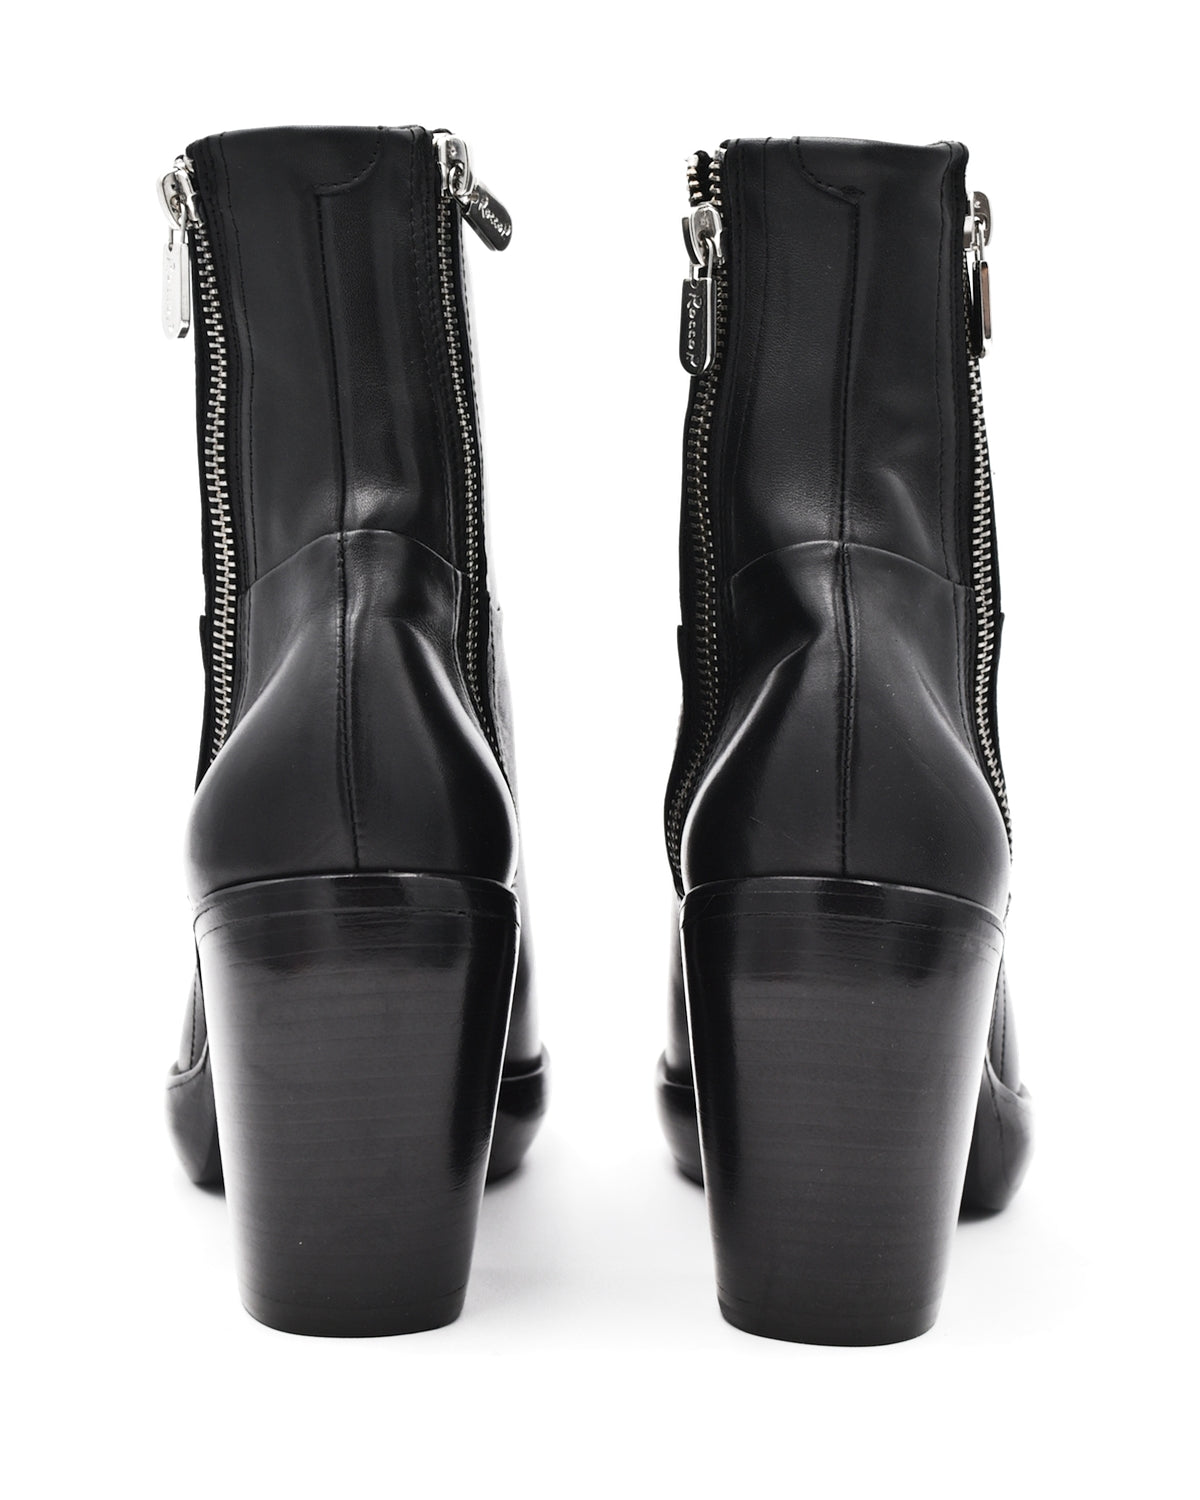 Rocco P Pointed Toe Platform Boots